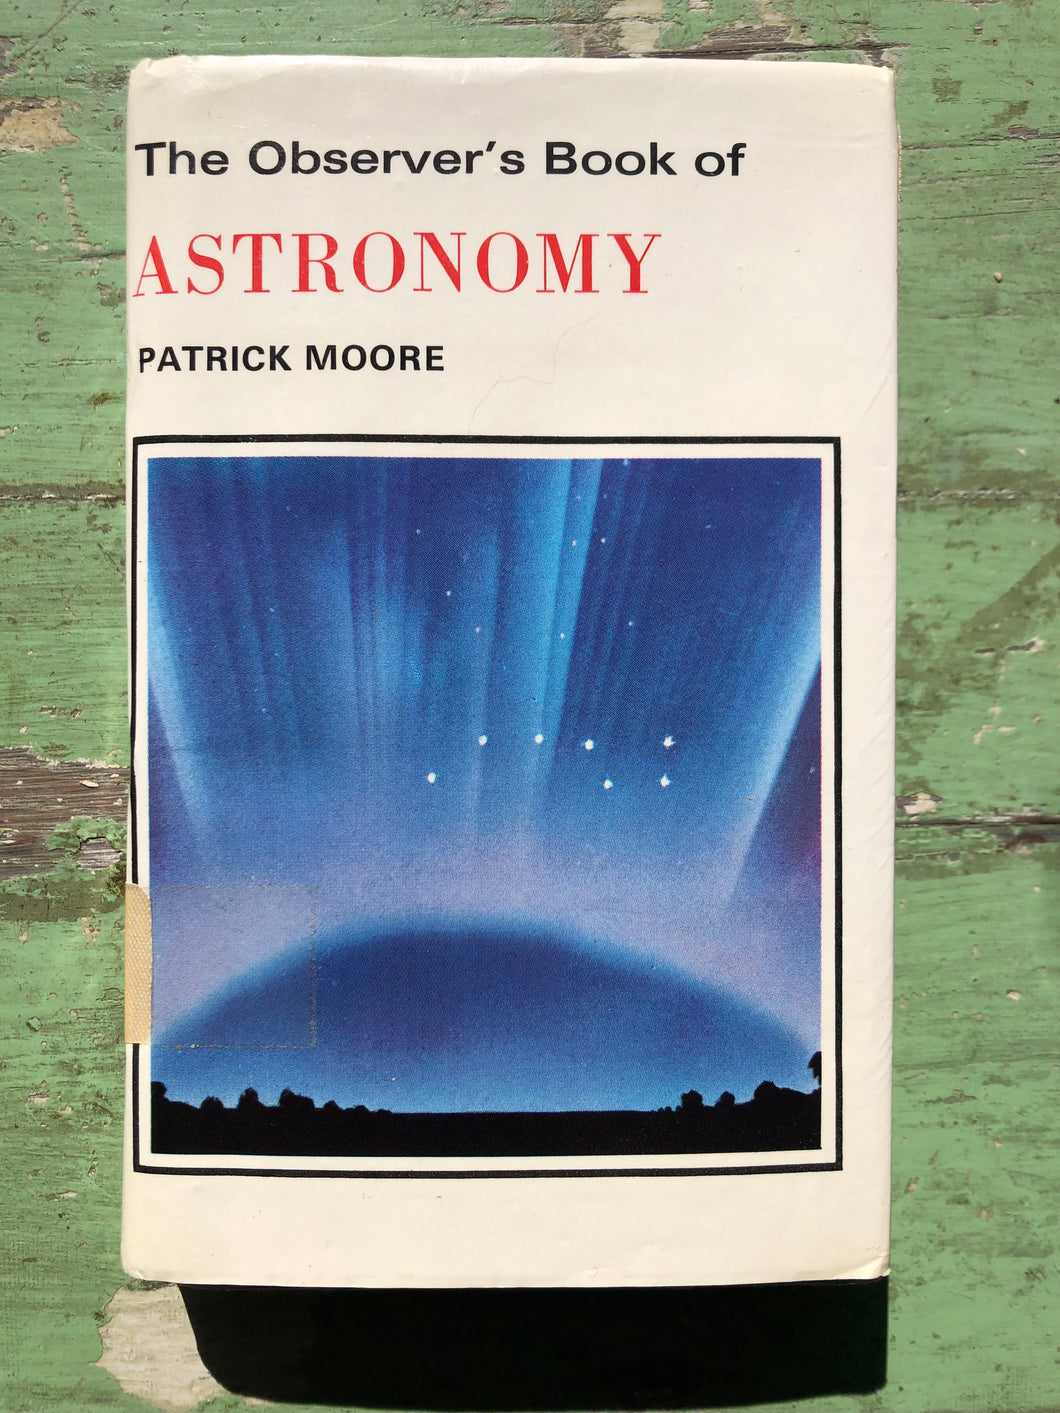 The Observer's Book of Astronomy. by Patrick Moore